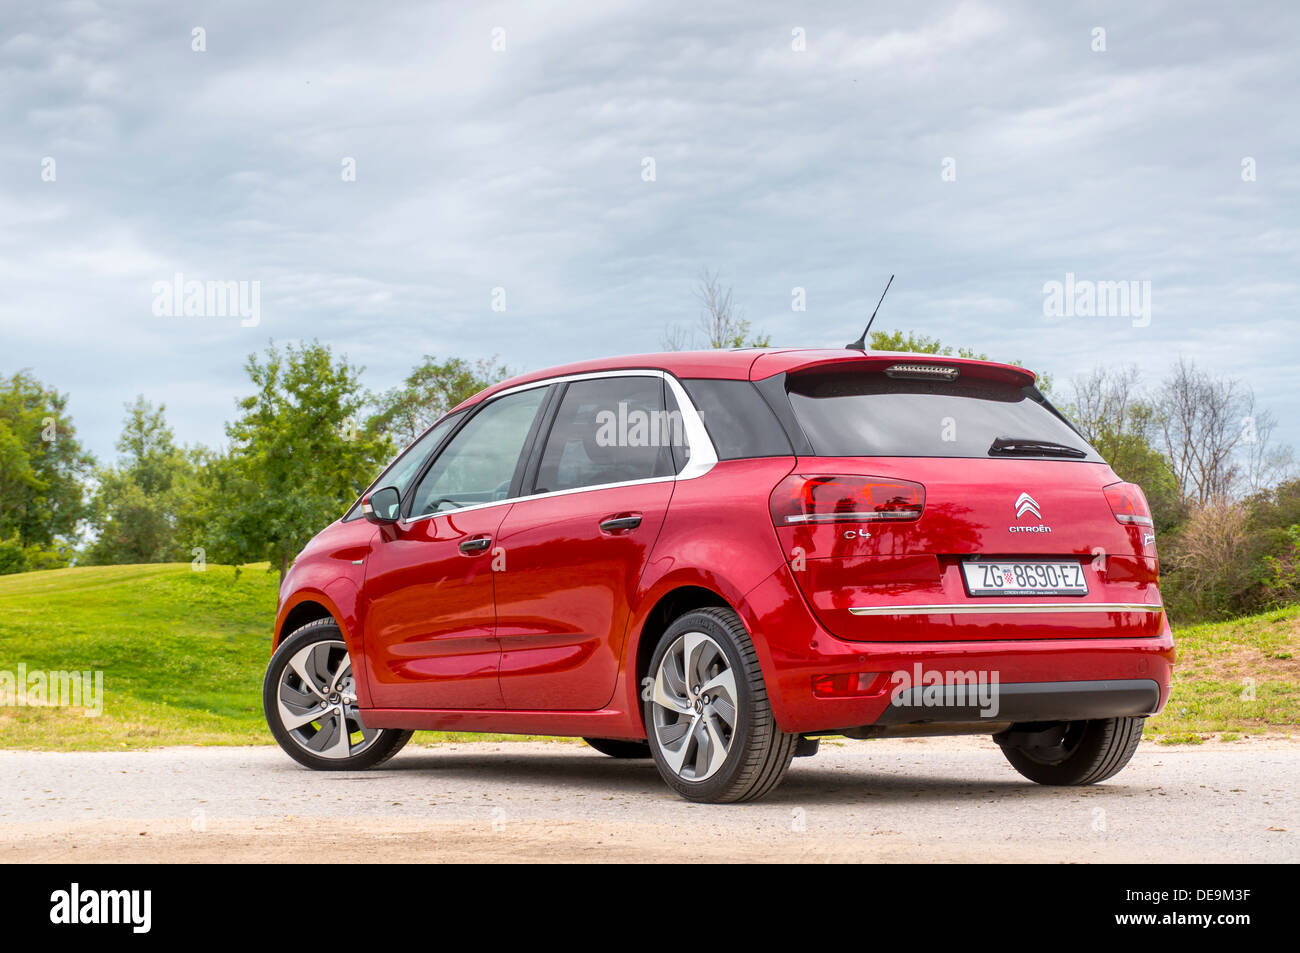 2nd generation of French MPV Citroen C4 Picasso Stock Photo